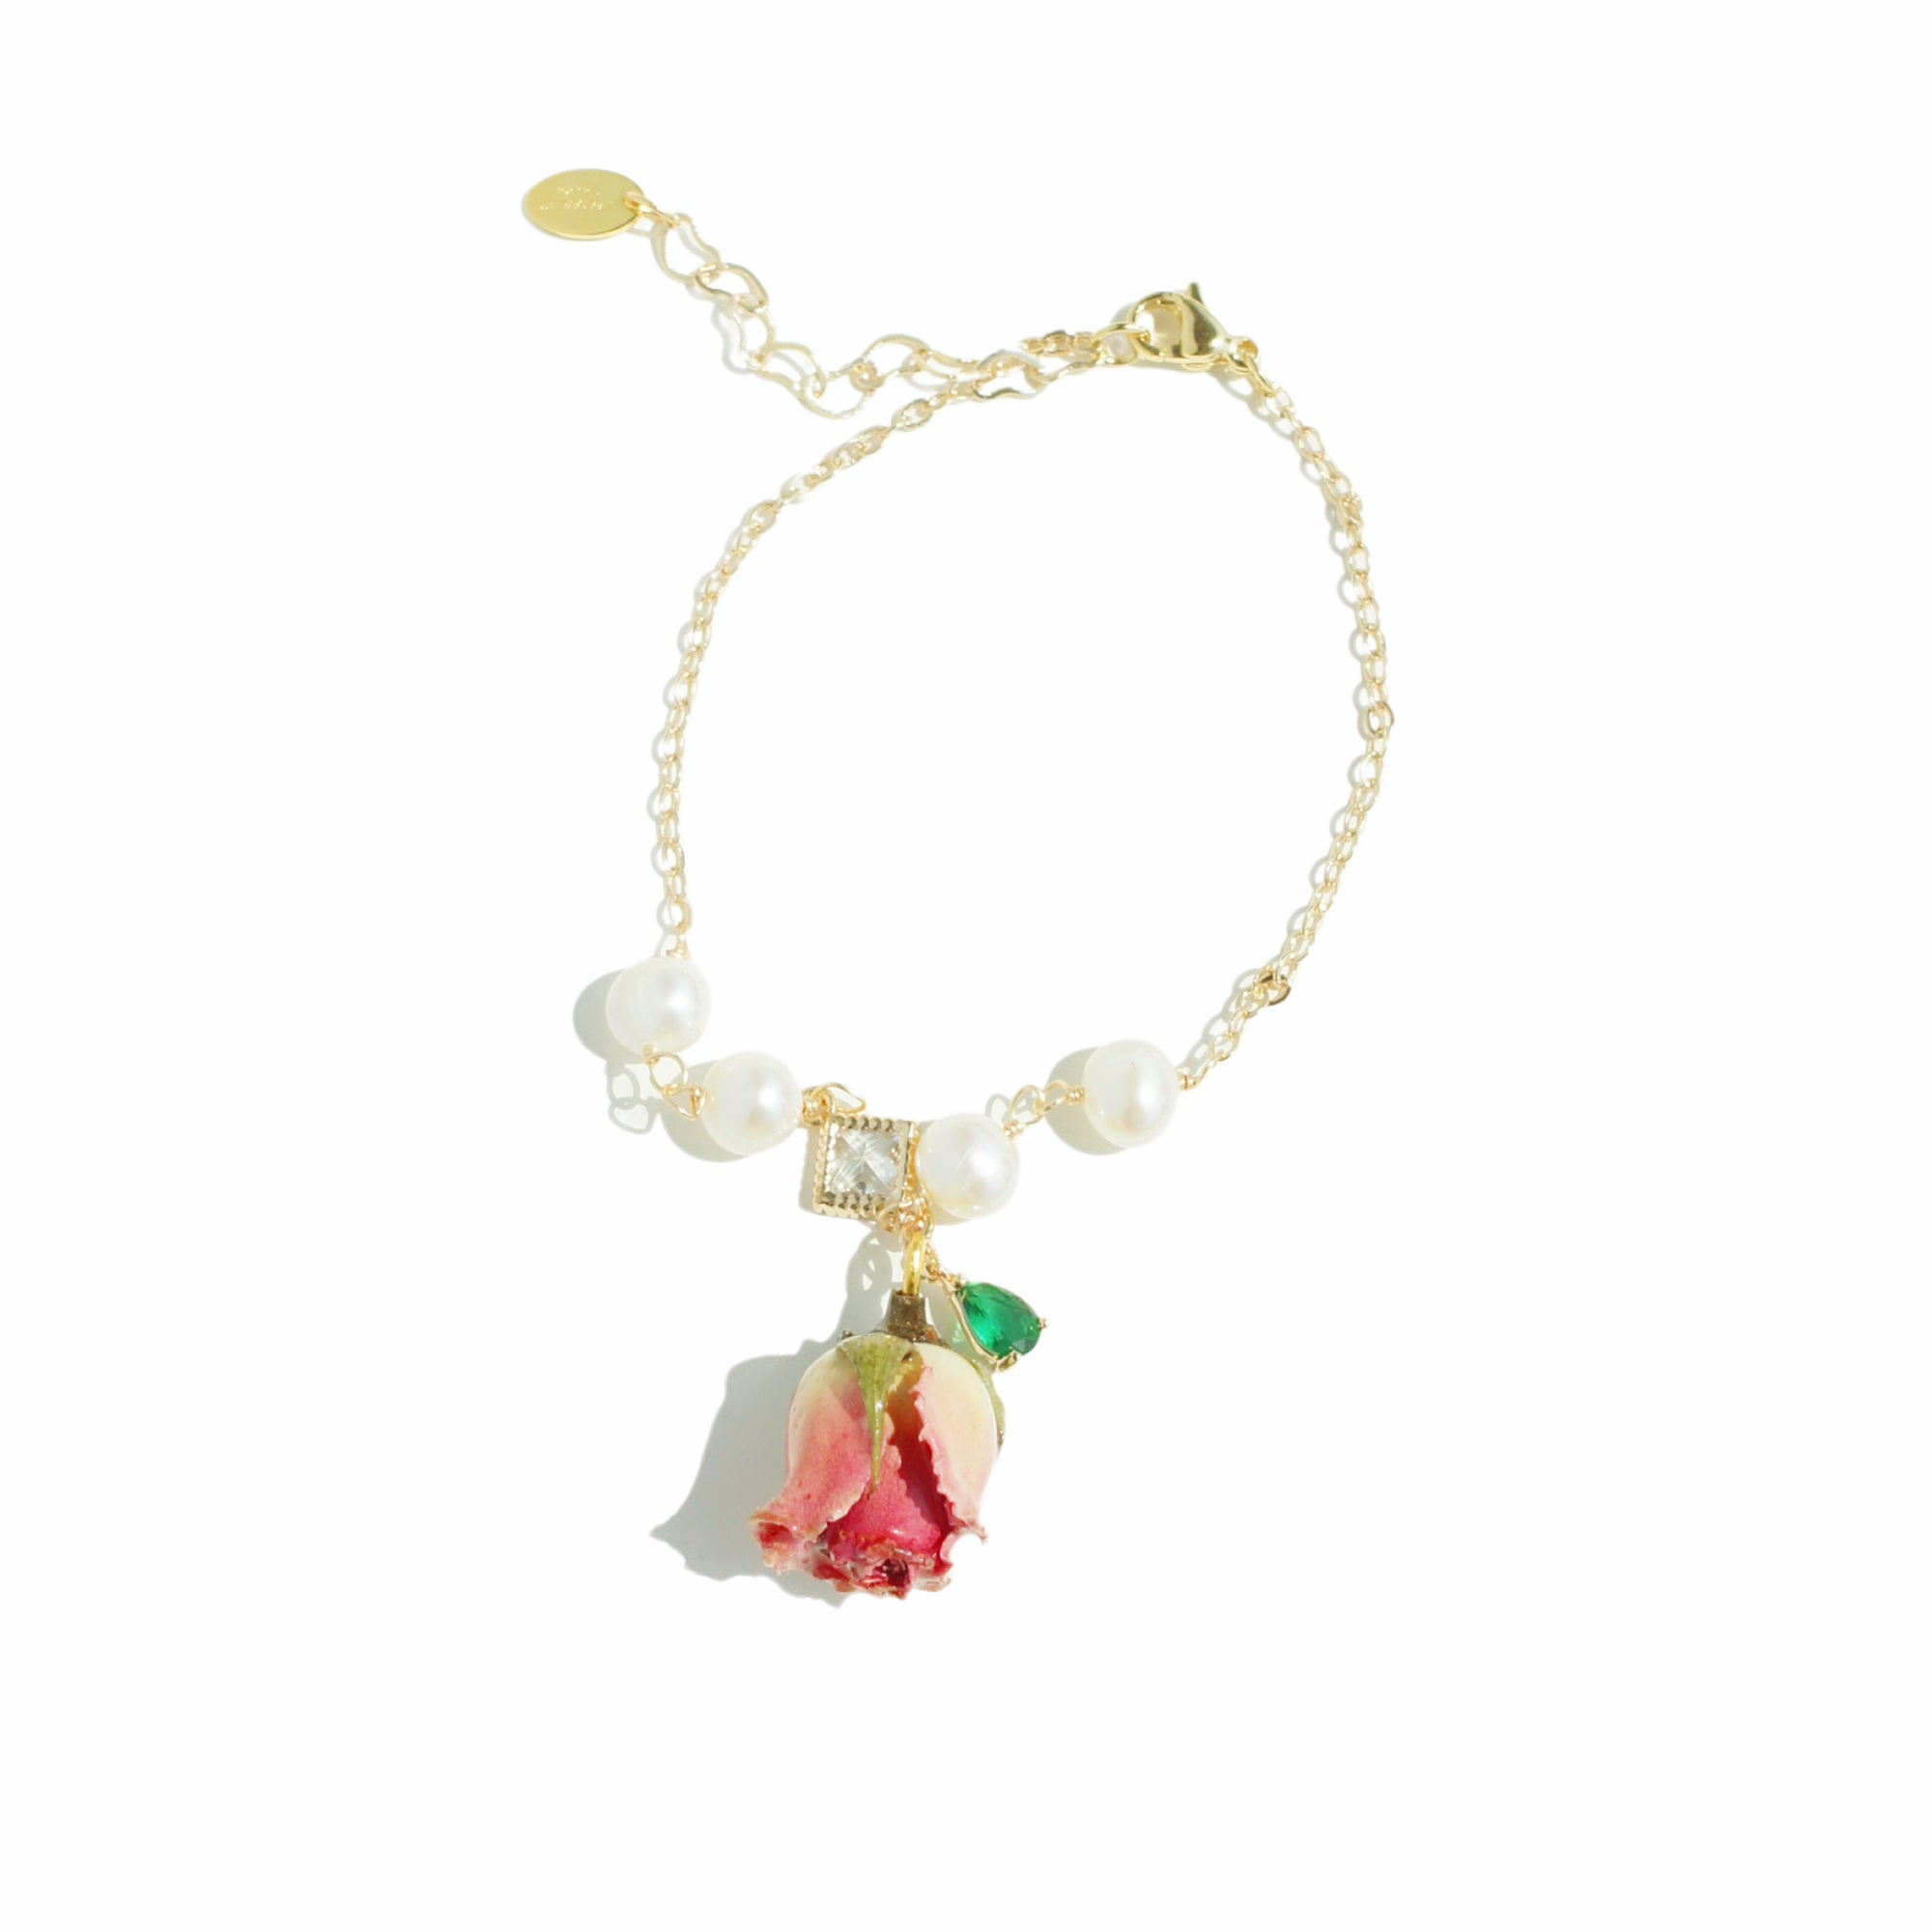 Bella Rosa Rosebud Bracelet with Green Crystal and Freshwater Pearl